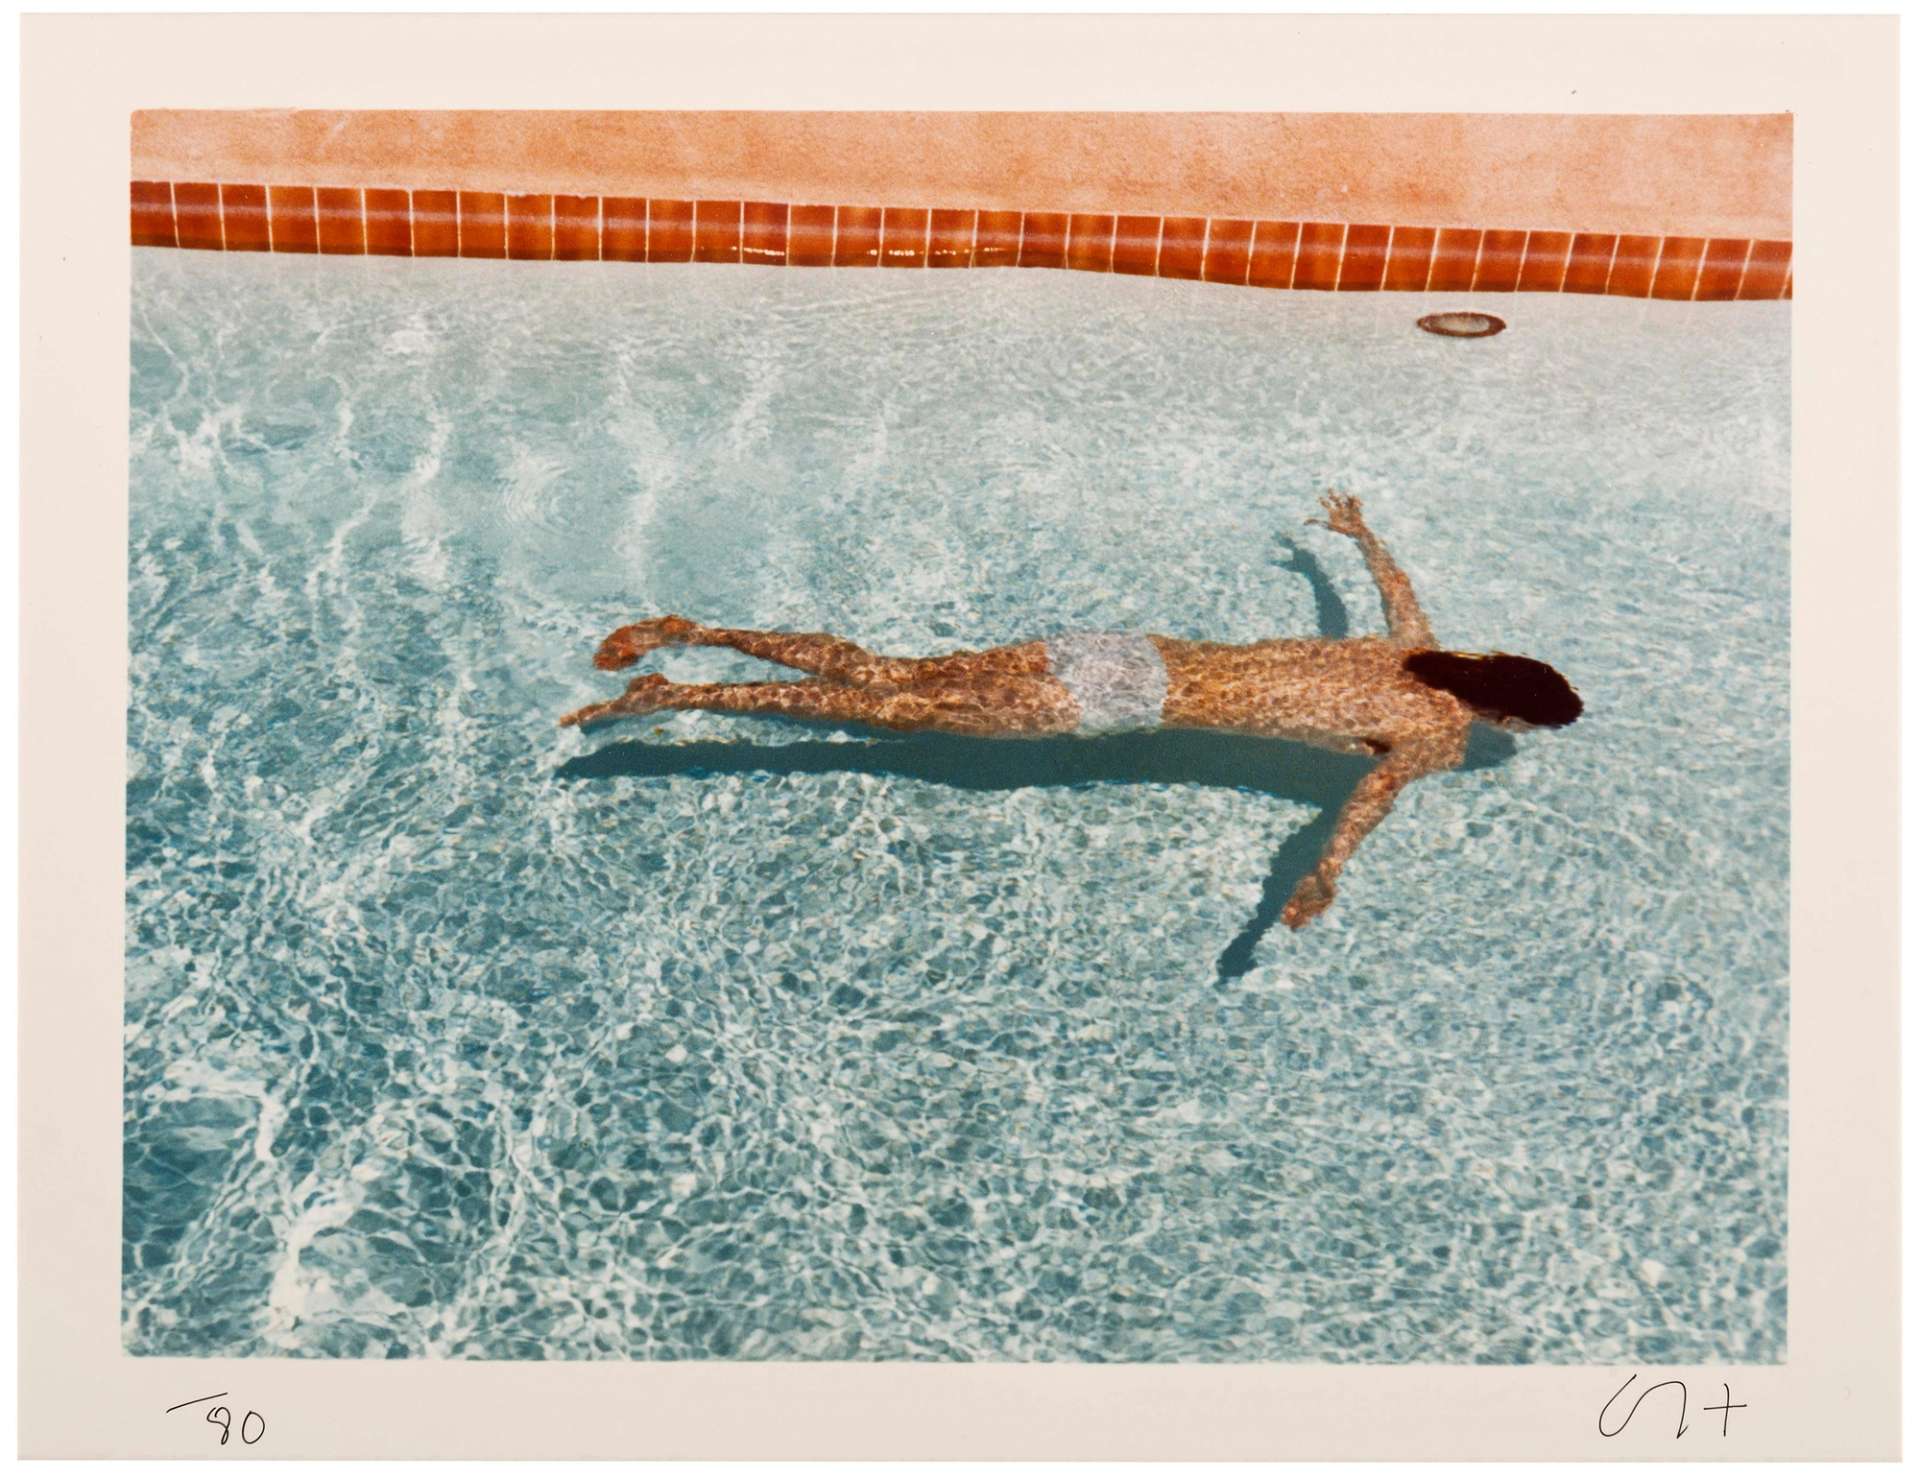 This photograph by British artist features a nude man swimming in a pool, face-down.